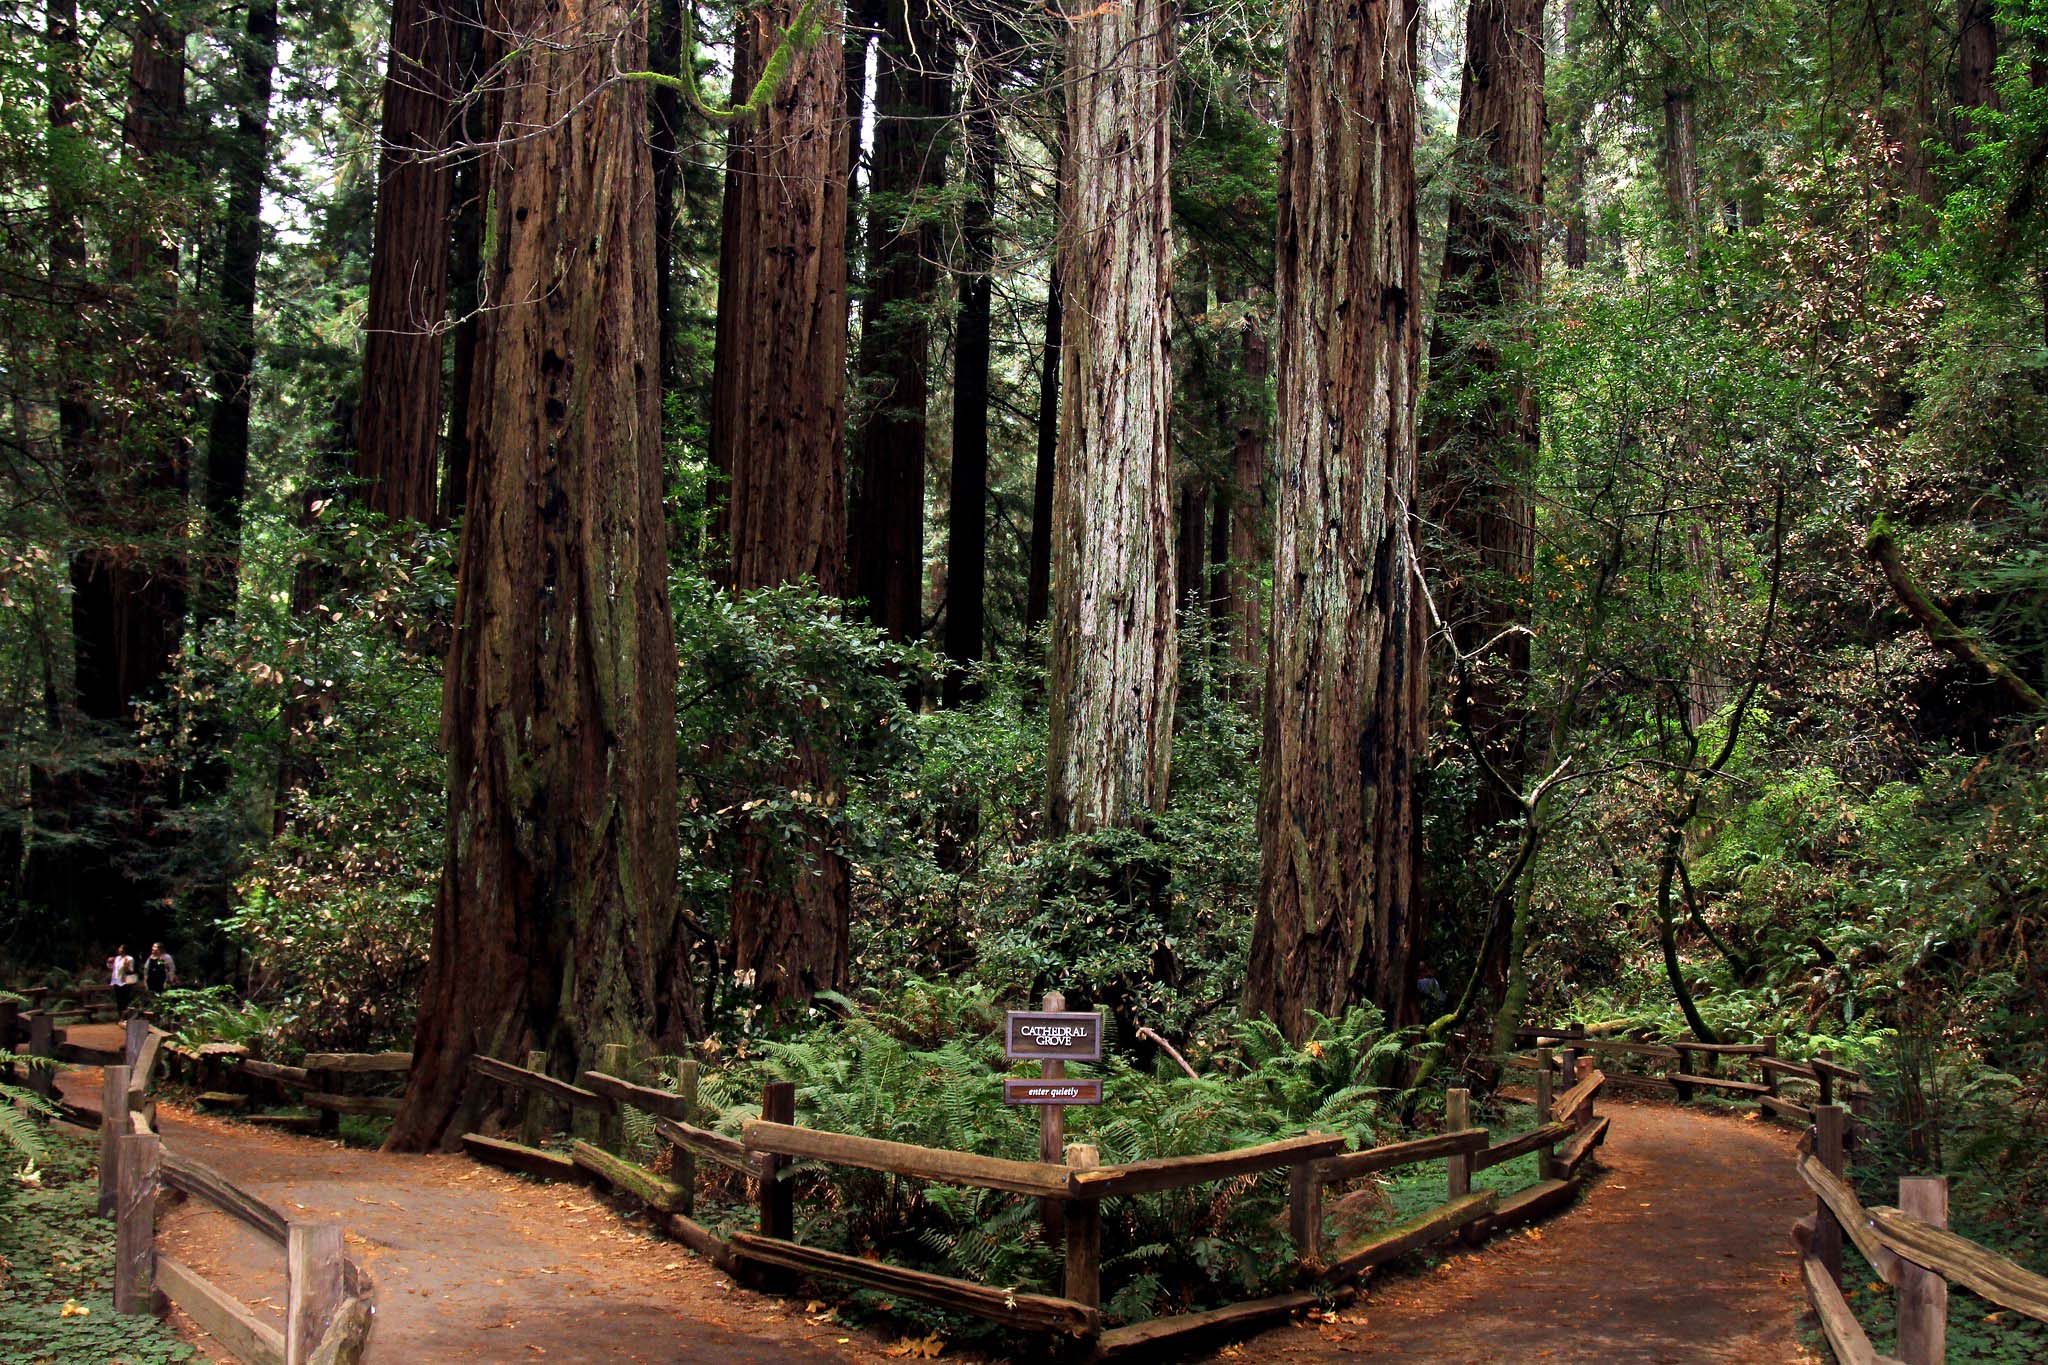 A dirt path with wooden fences on either side winding through a redwood forest